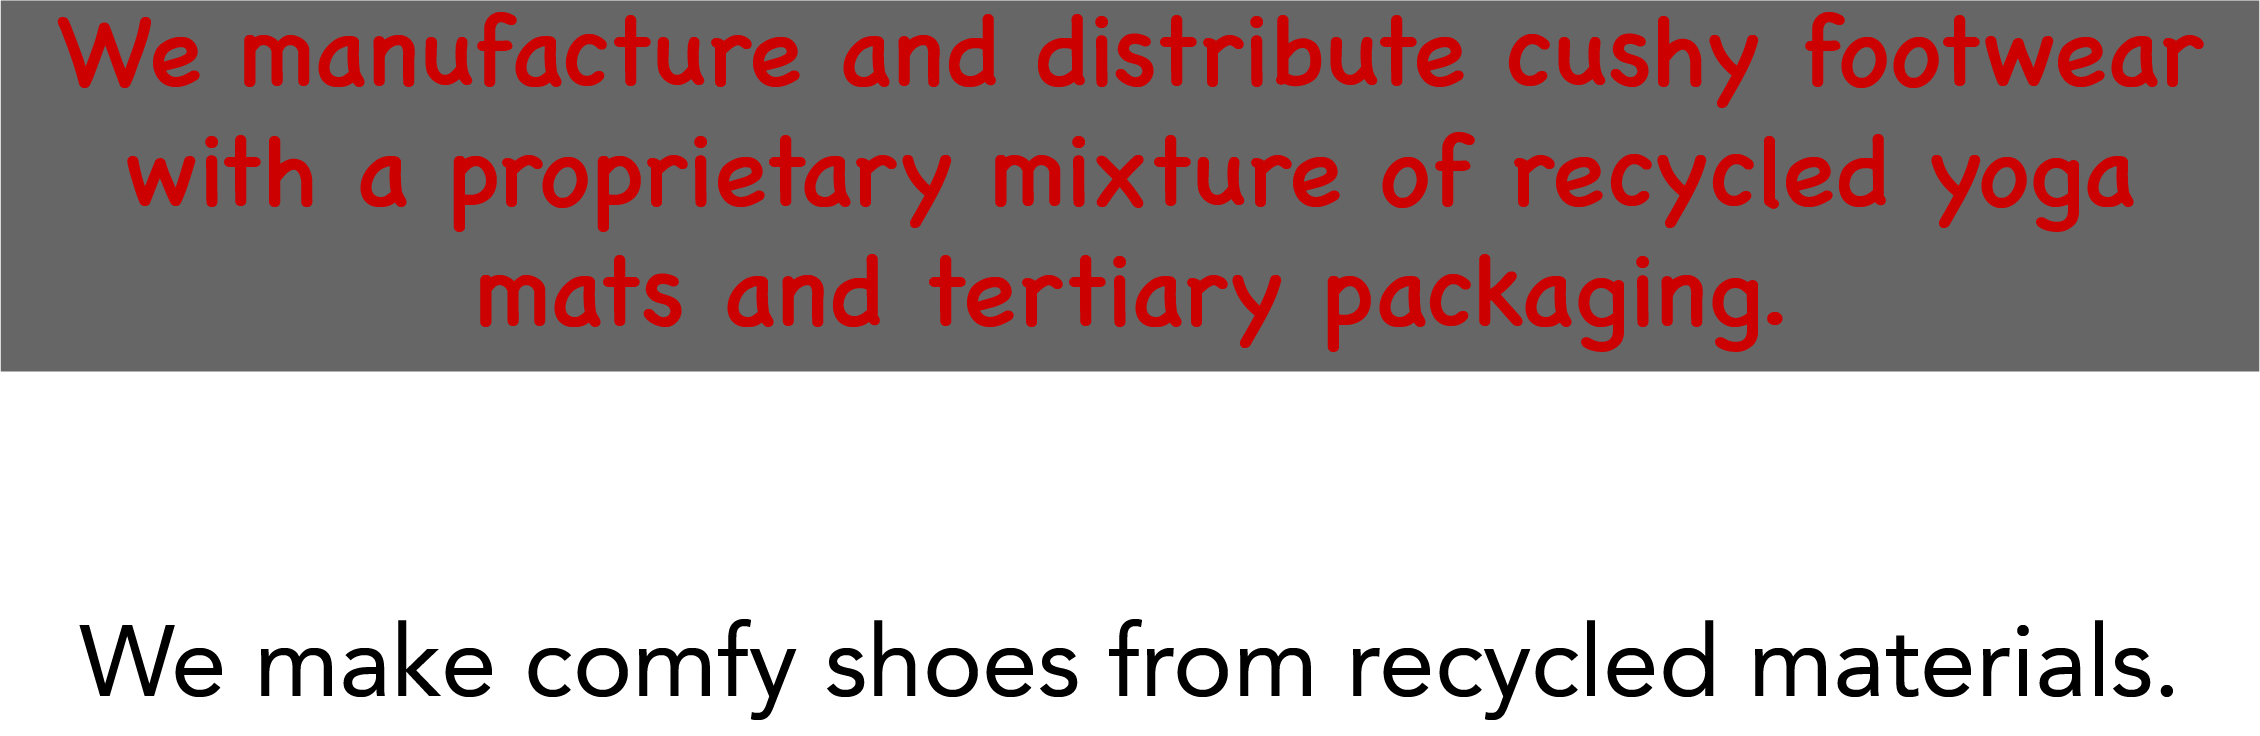 The top part of the image has red comic text on a grey background that reads "We manufacture and distribute cushy footwear with a proprietary mixture of recycled yoga mats and tertiary packaging". The bottom part of the image has black sans serif font on a white background that reads "We make comfy shoes from recycled materials".